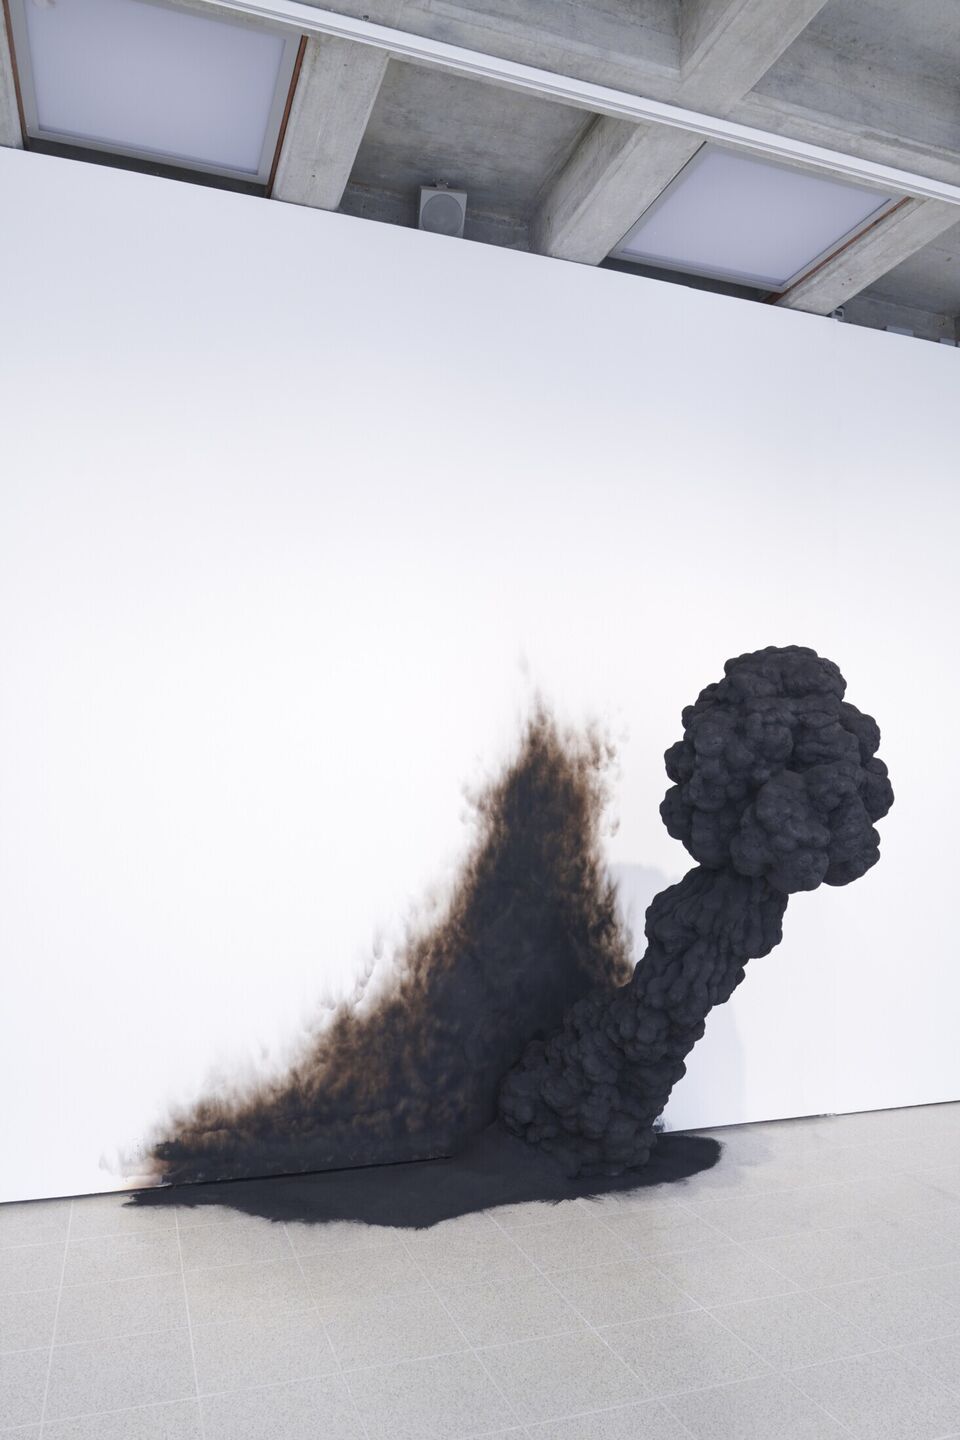 A charcoal black smokelike figure appears to emerge through ashes through the white wall of an art gallery